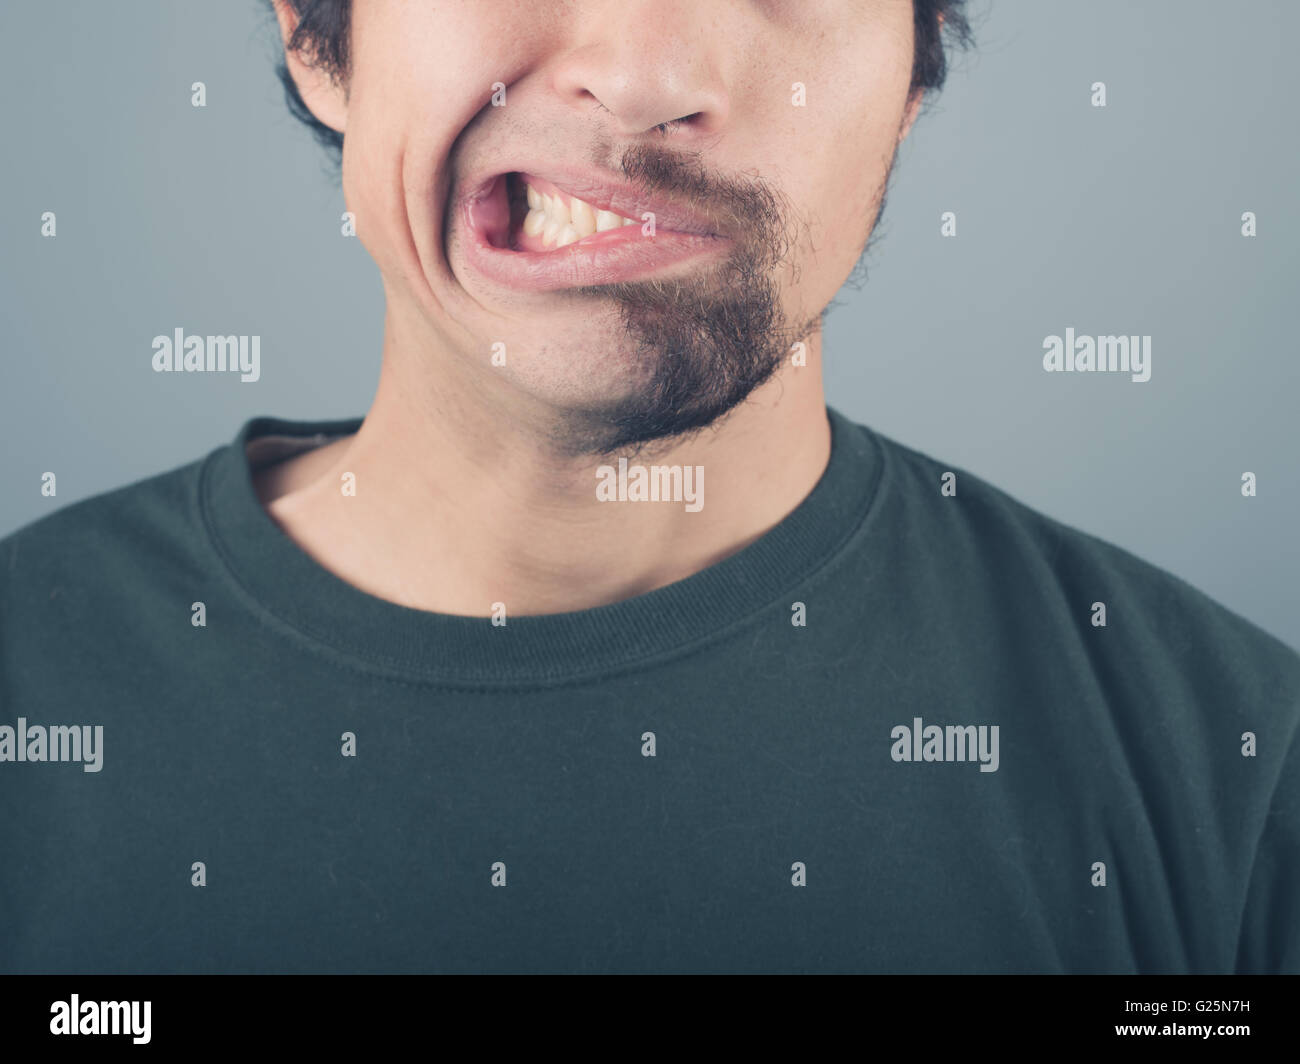 A man with a half shaved beard is pulling faces Stock Photo